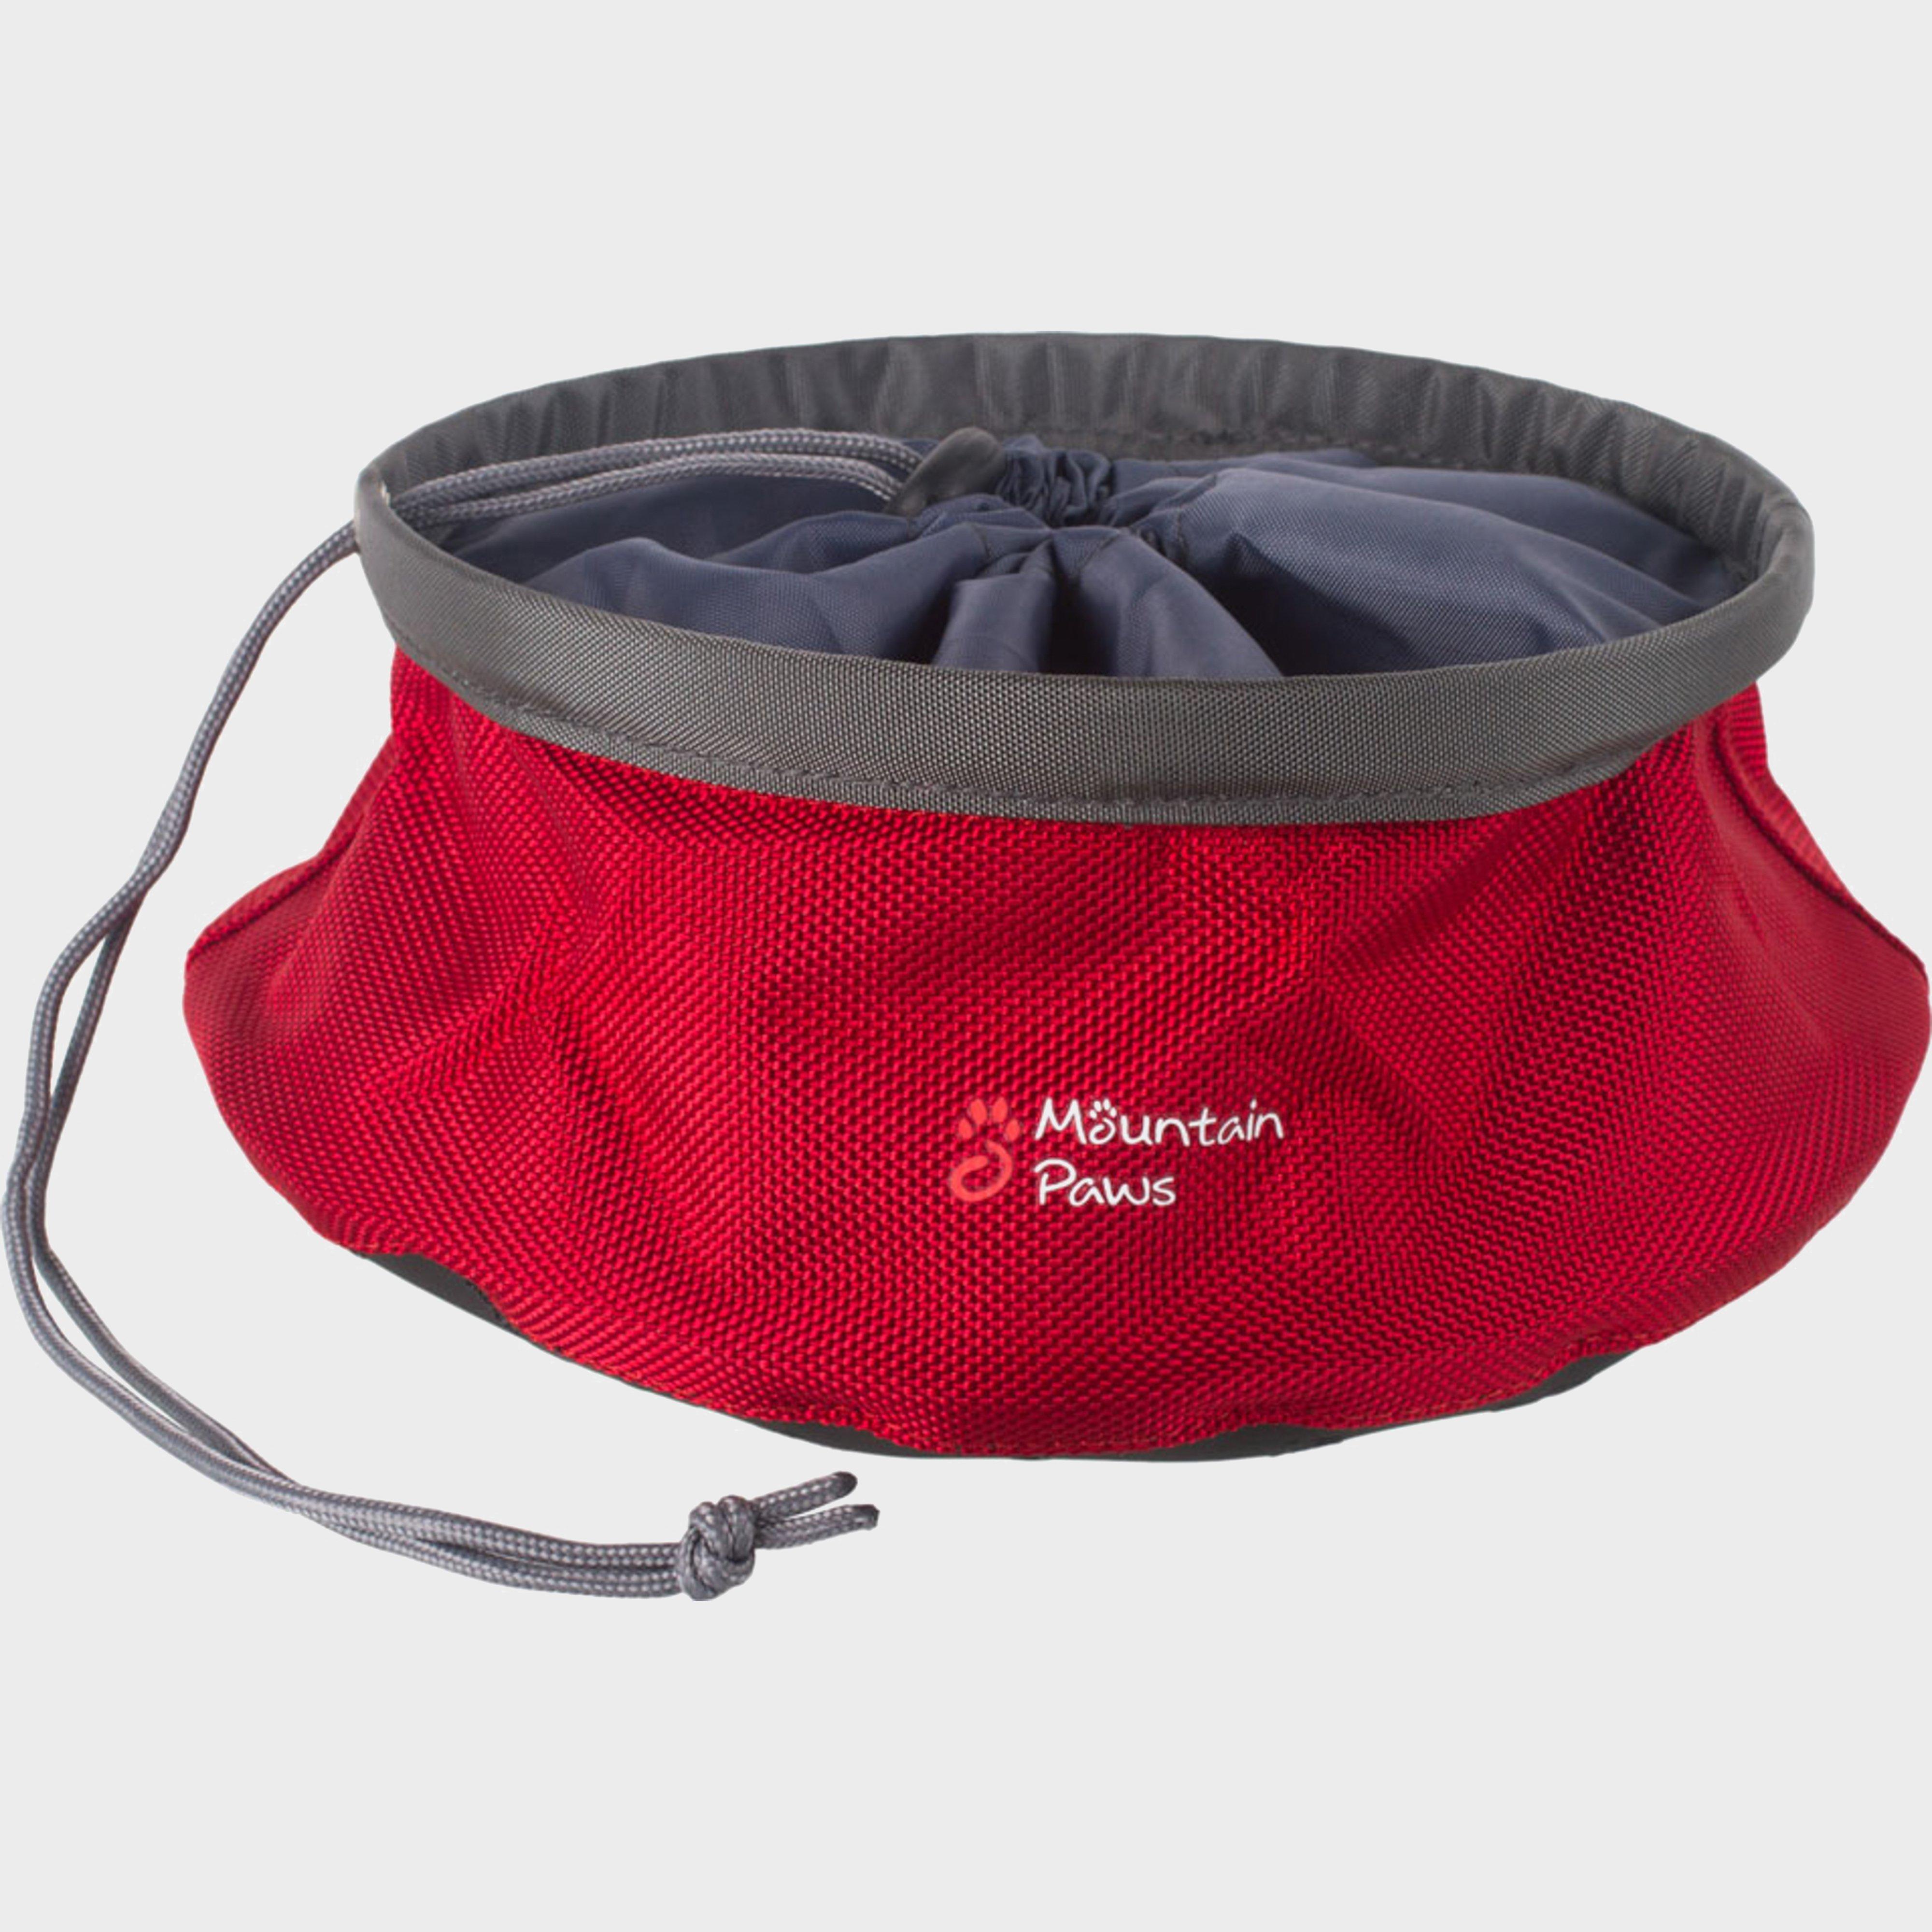 Image of Mountain Paws Dog Food Bowl - Red/Lrg, Red/LRG